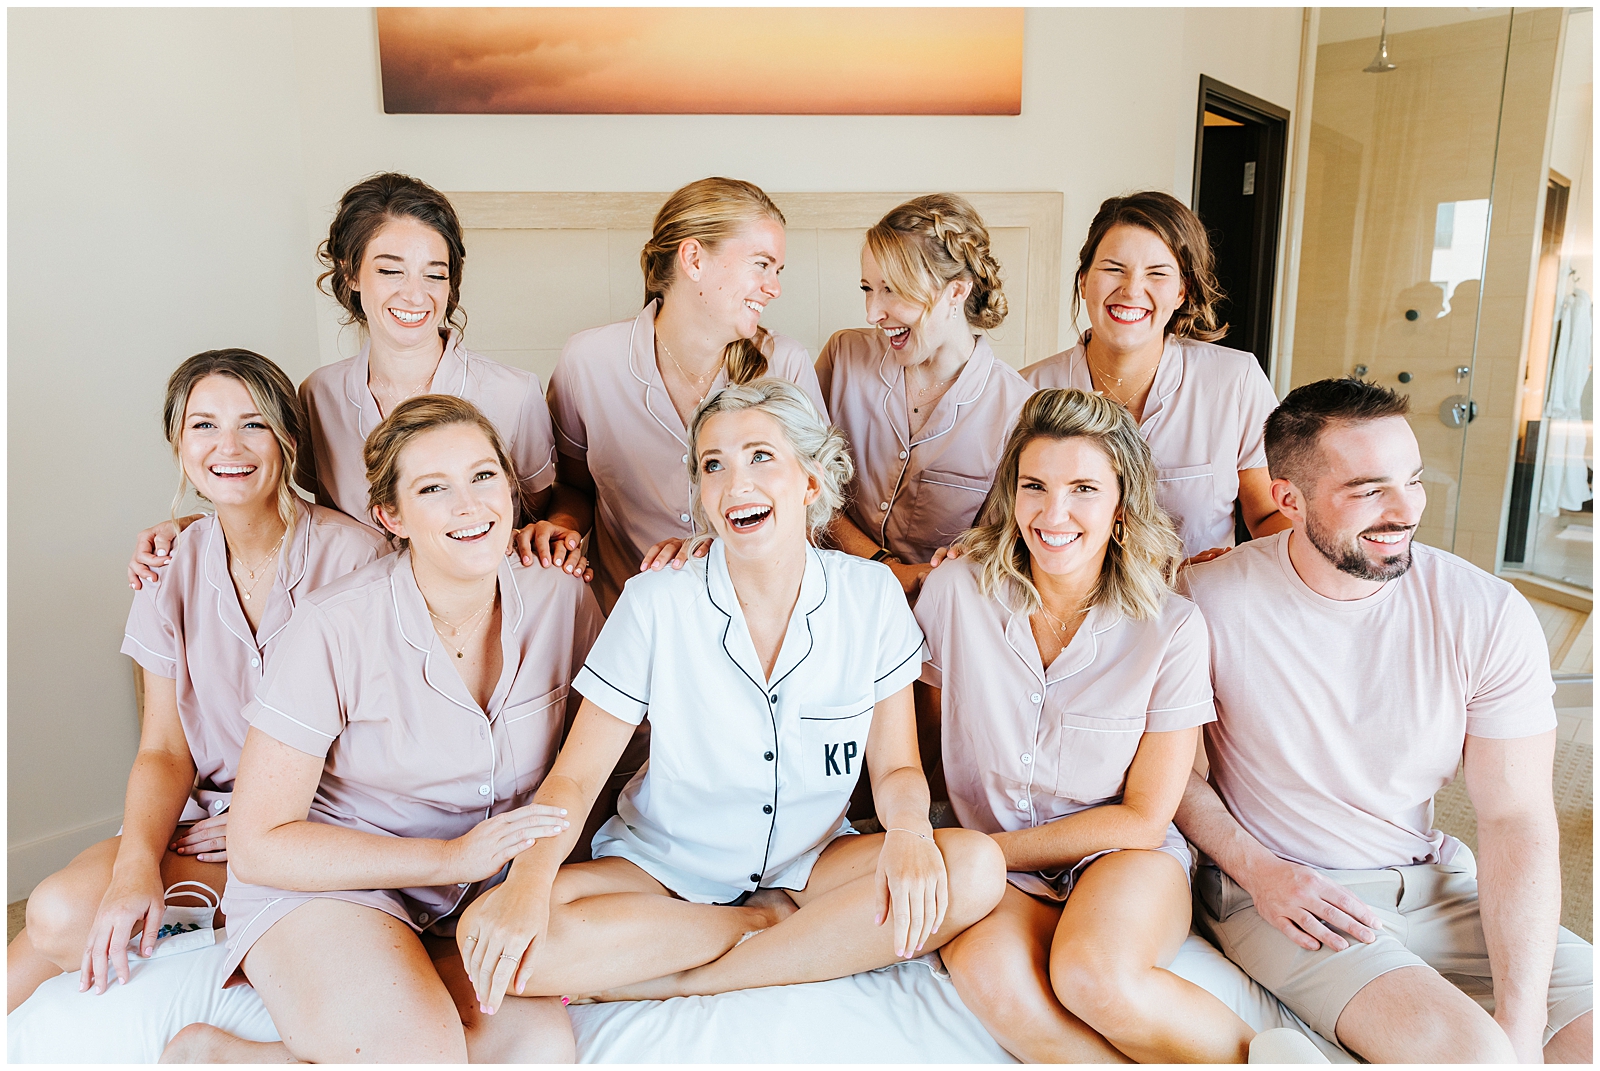 Bridal Party Getting Ready in Matching PJ's